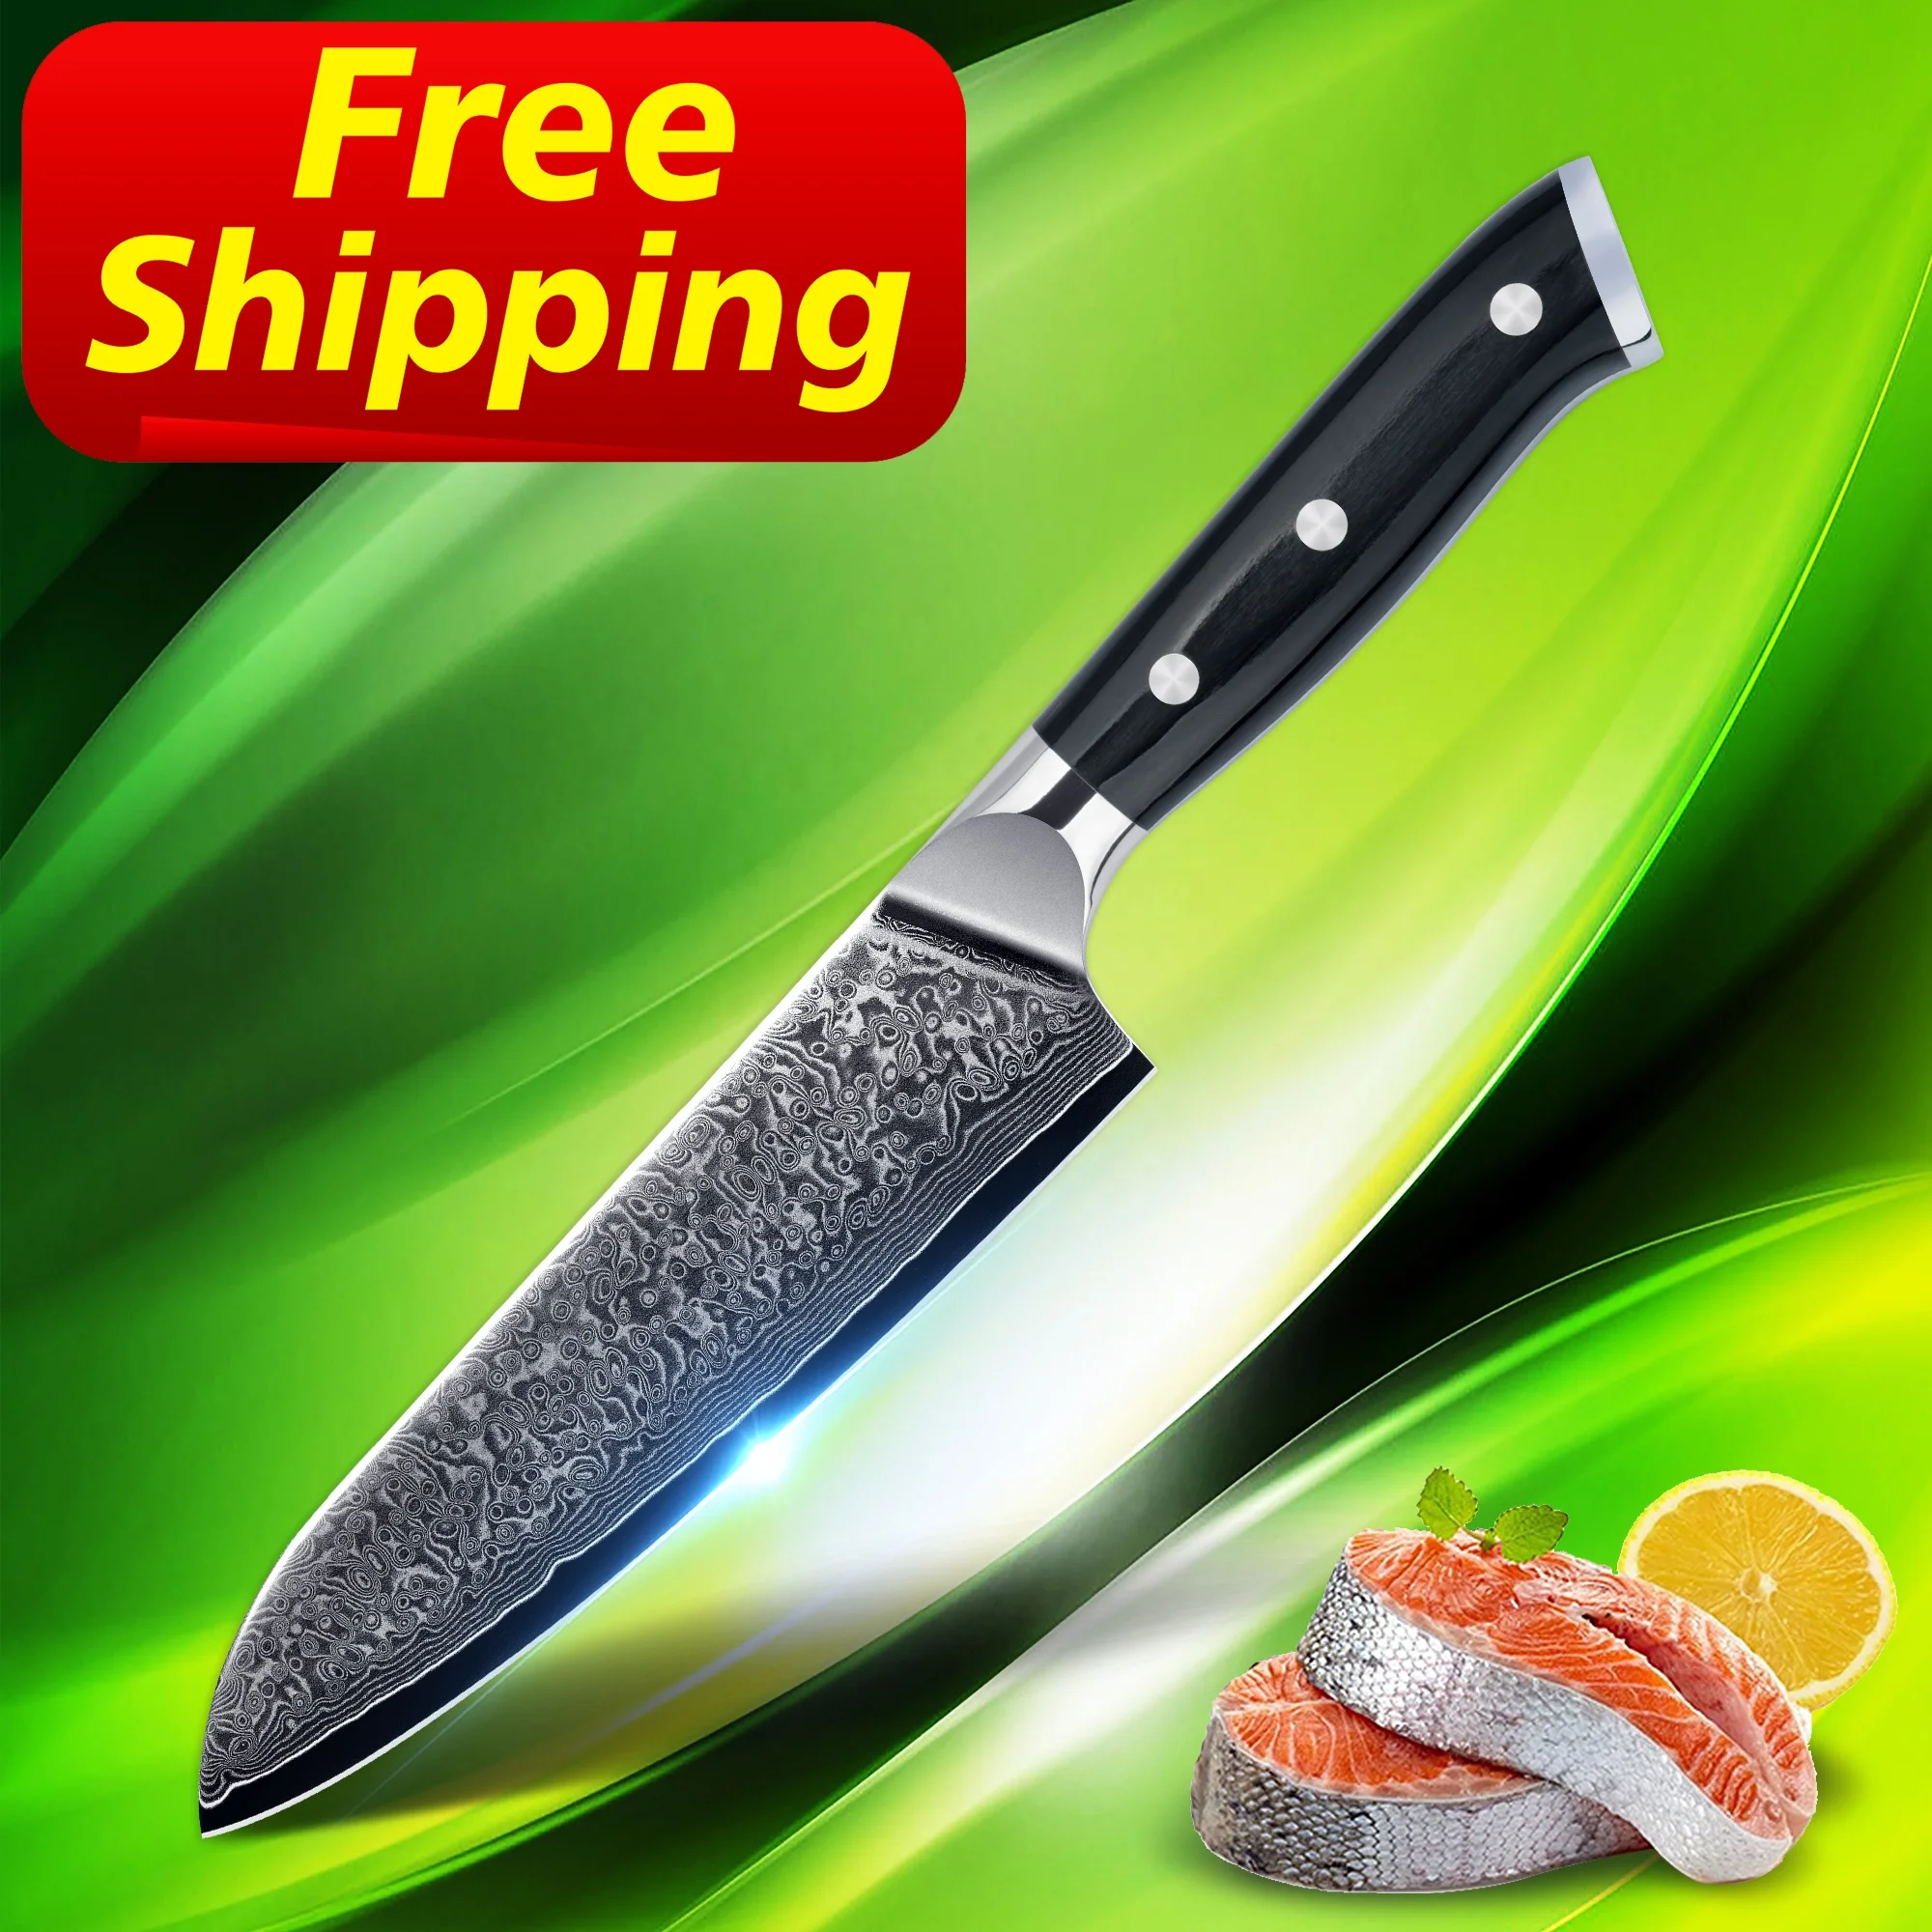 

Free Shipping orders over 100 pcs Skycook Featured 7 inch japanese damascus steel vg10 santoku knife 67layers, Customized color